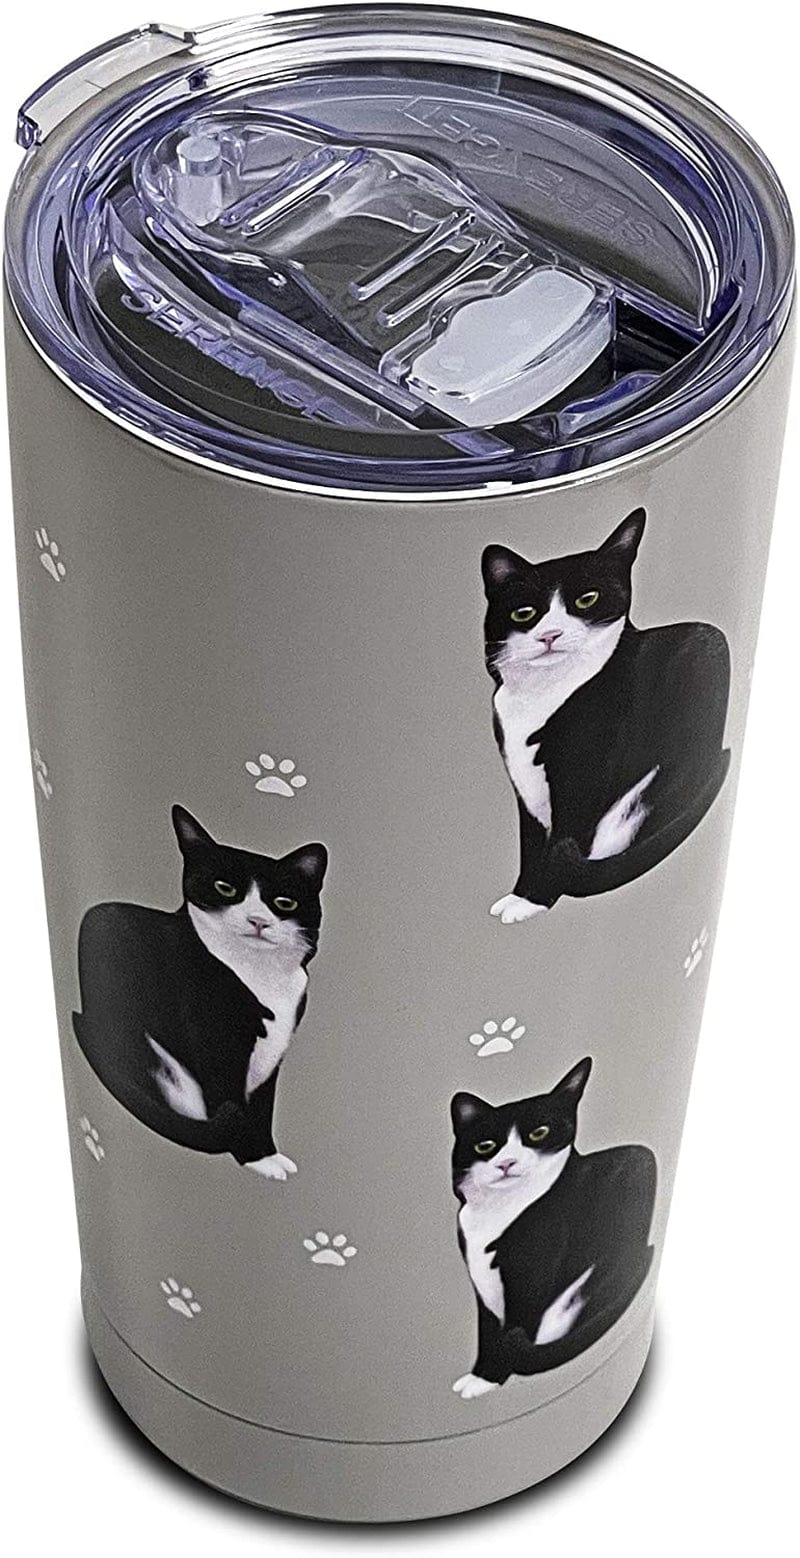 Australian Shepherd SERENGETI 16 Oz. Stainless Steel, Vacuum Insulated Tumbler with Spill Proof Lid - 3D Print - Insulated Travel Mug for Hot or Cold Drinks (Australian Shepherd Tumbler) Home & Garden > Kitchen & Dining > Tableware > Drinkware SERENGETI Black And White Cat Tumbler  